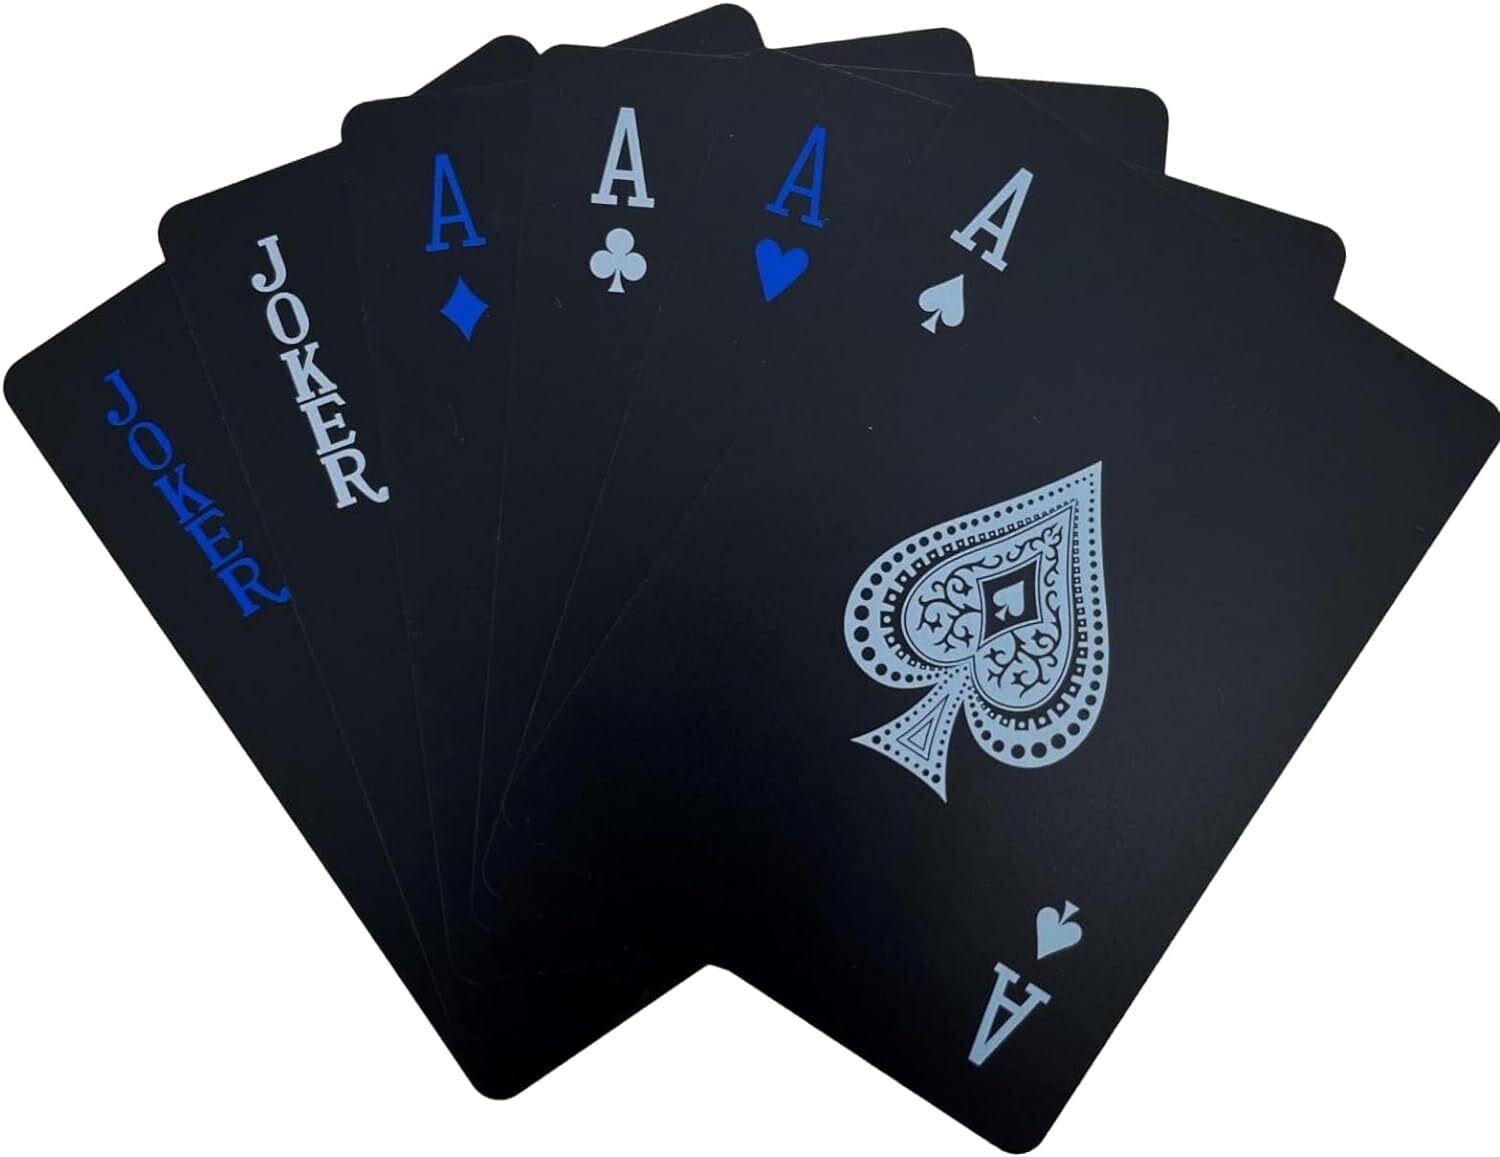 Creative Waterproof Plastic PVC Poker Black Magic Playing Cards Table Game Sets